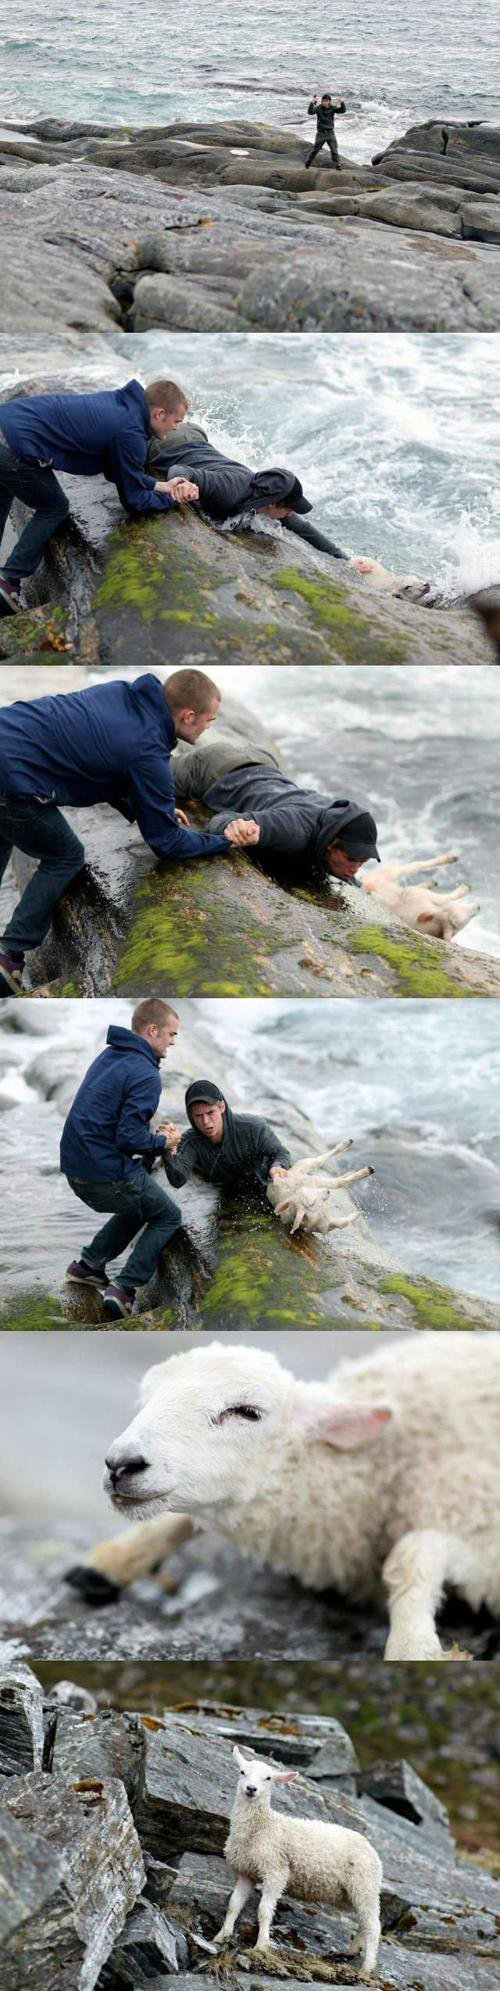 Norwegian+guys+rescuing+a+sheep+from+the+ocean